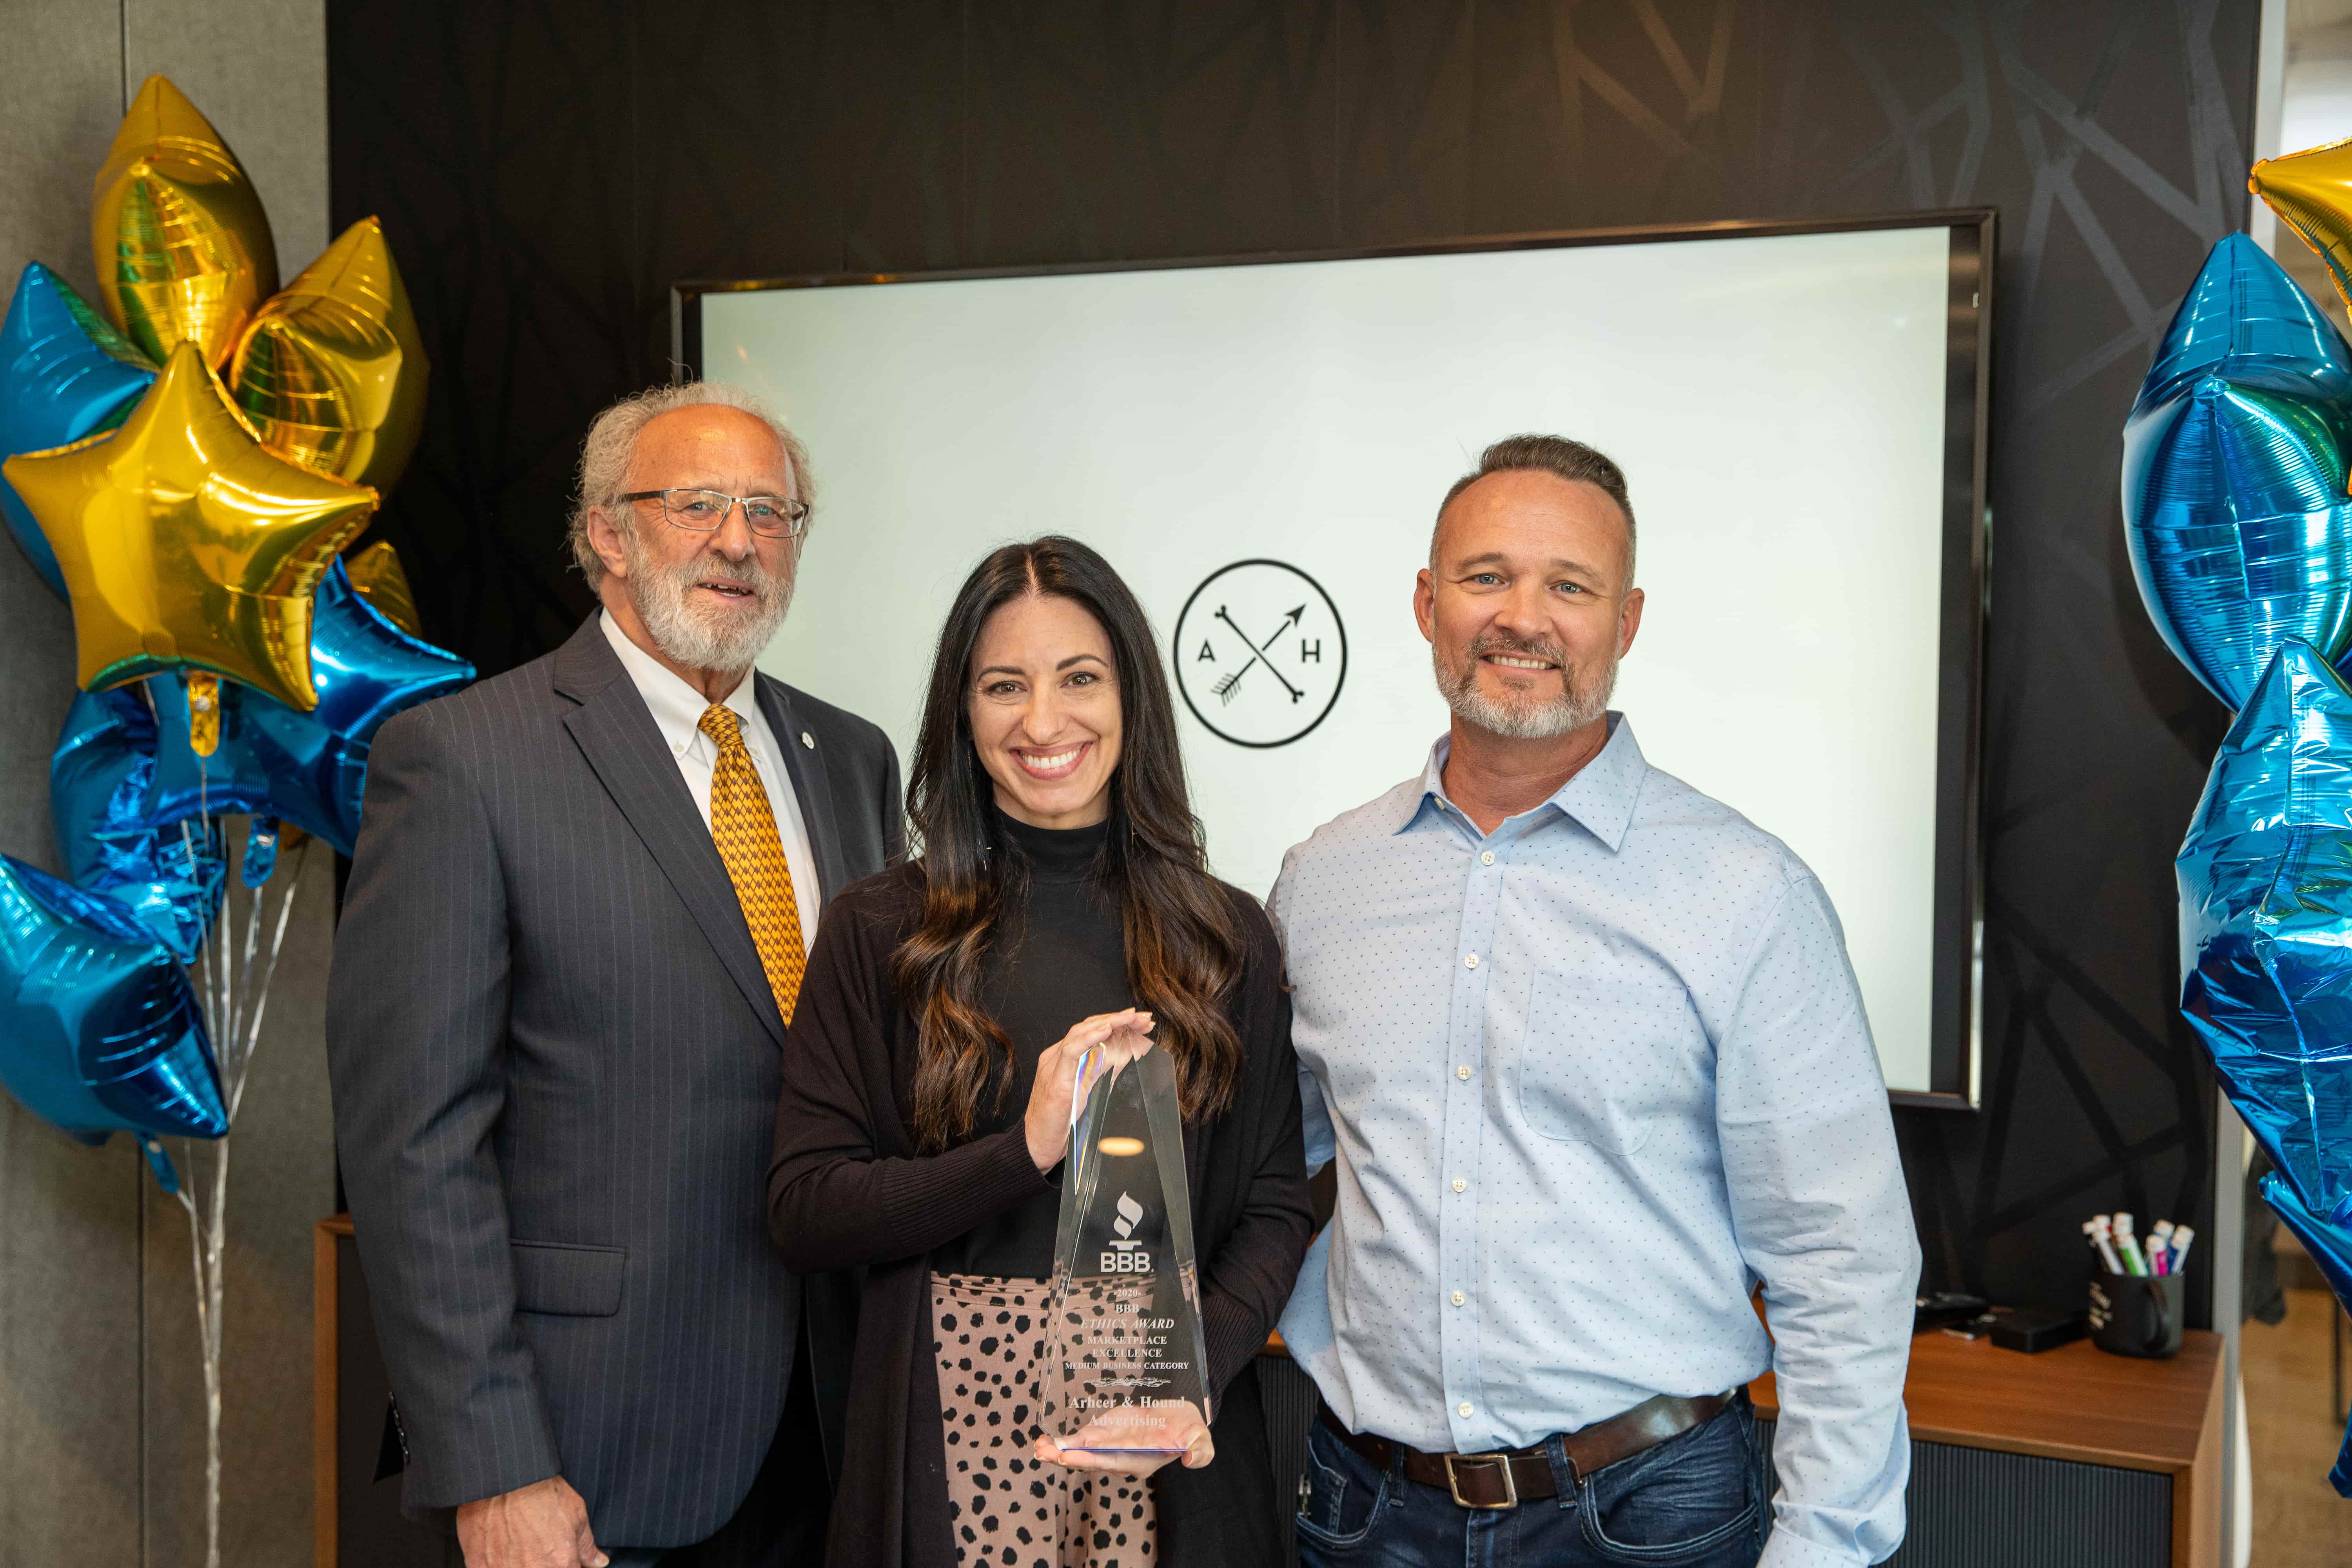 Archer & Hound owners Jessica Blanchfield and Dave Blanchfield receive a BBB Ethics Award